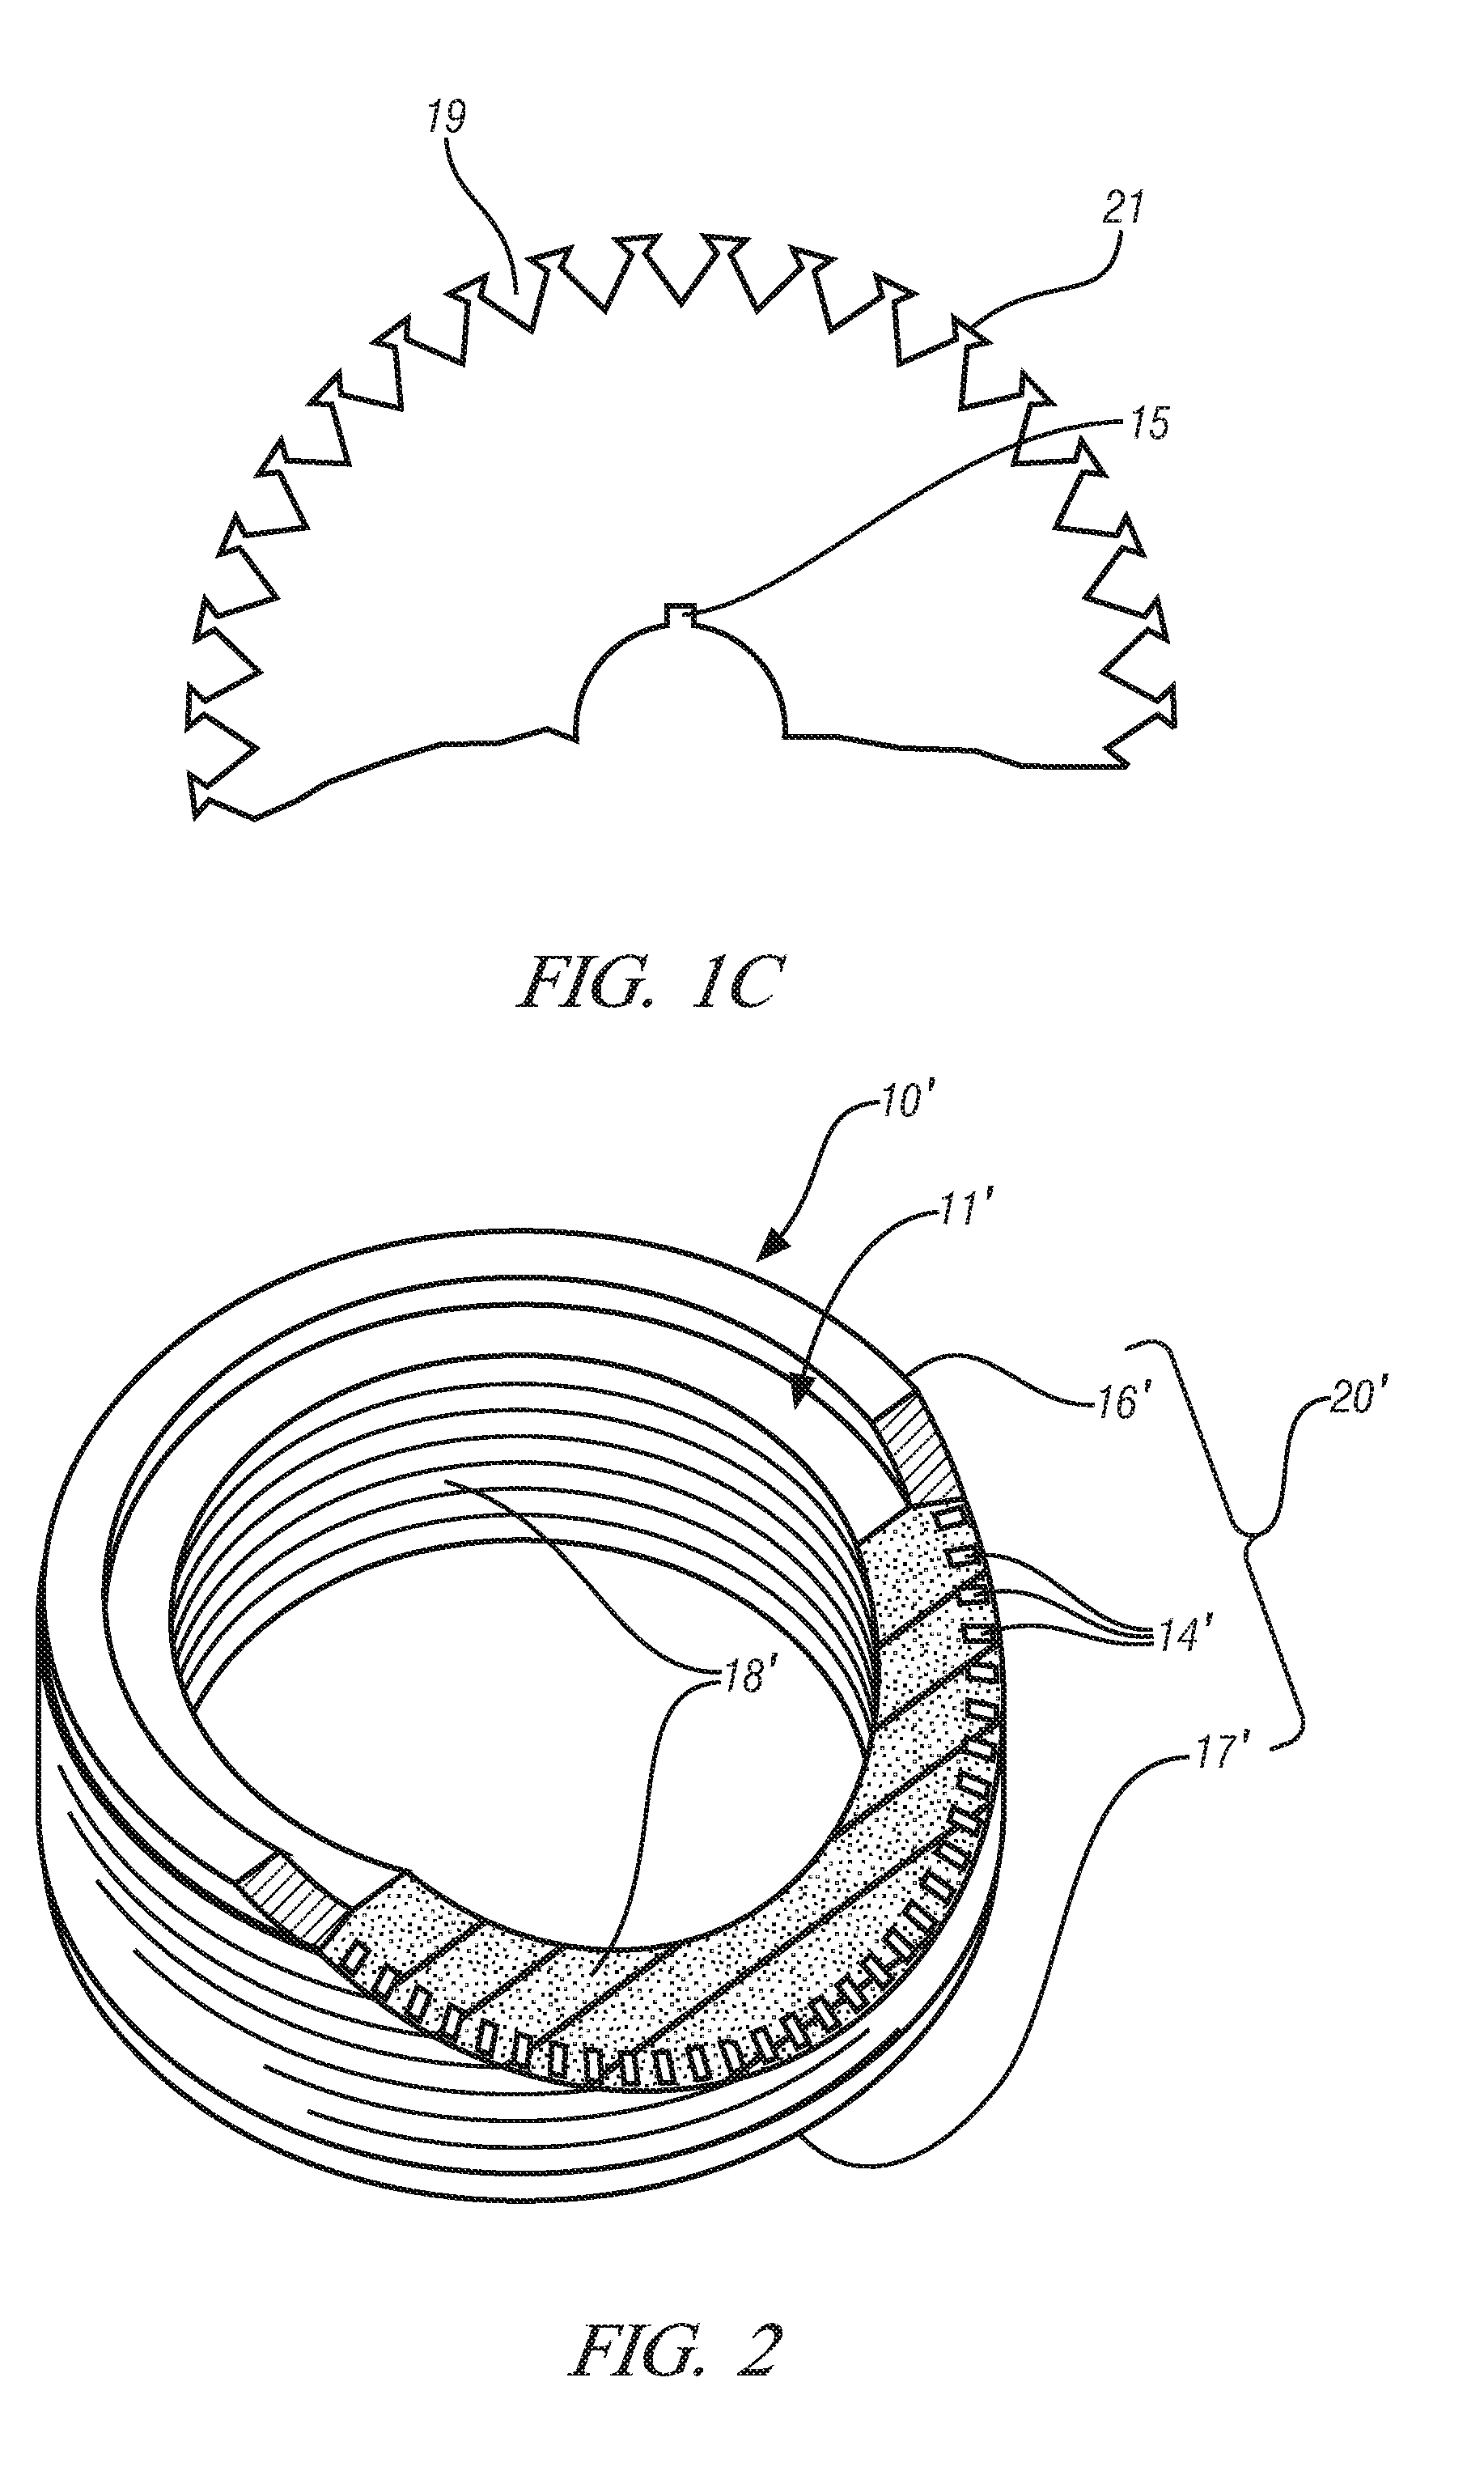 Centrifugally-cast shorted structure for induction motor rotors